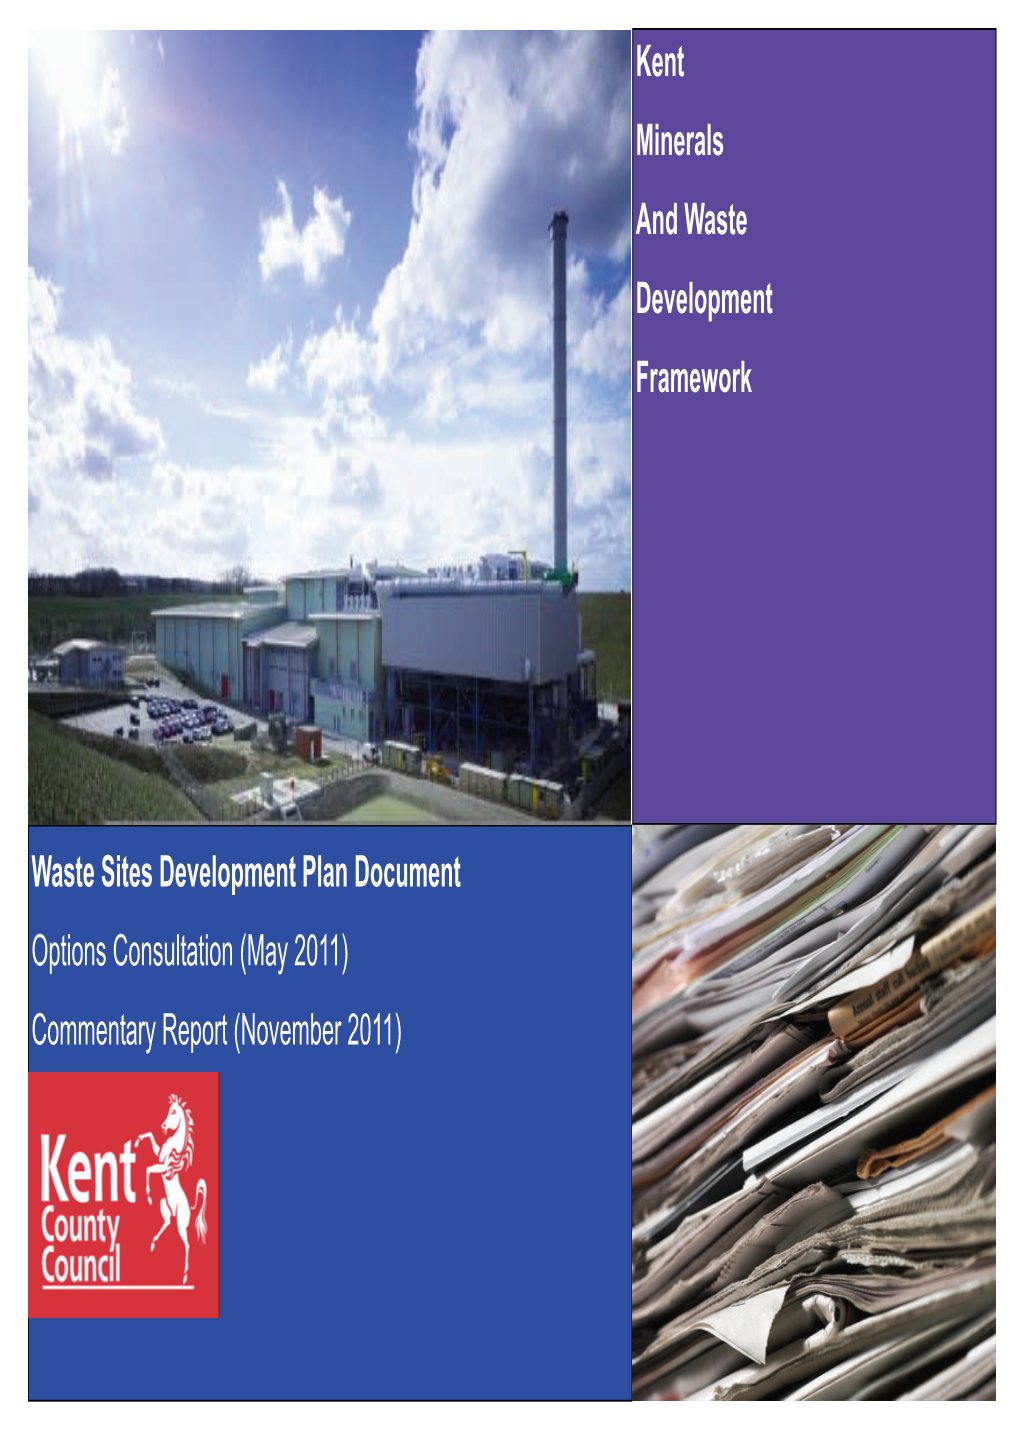 Waste Sites Development Plan Document Options Consultation (May 2011) Commentary Report (November 2011)